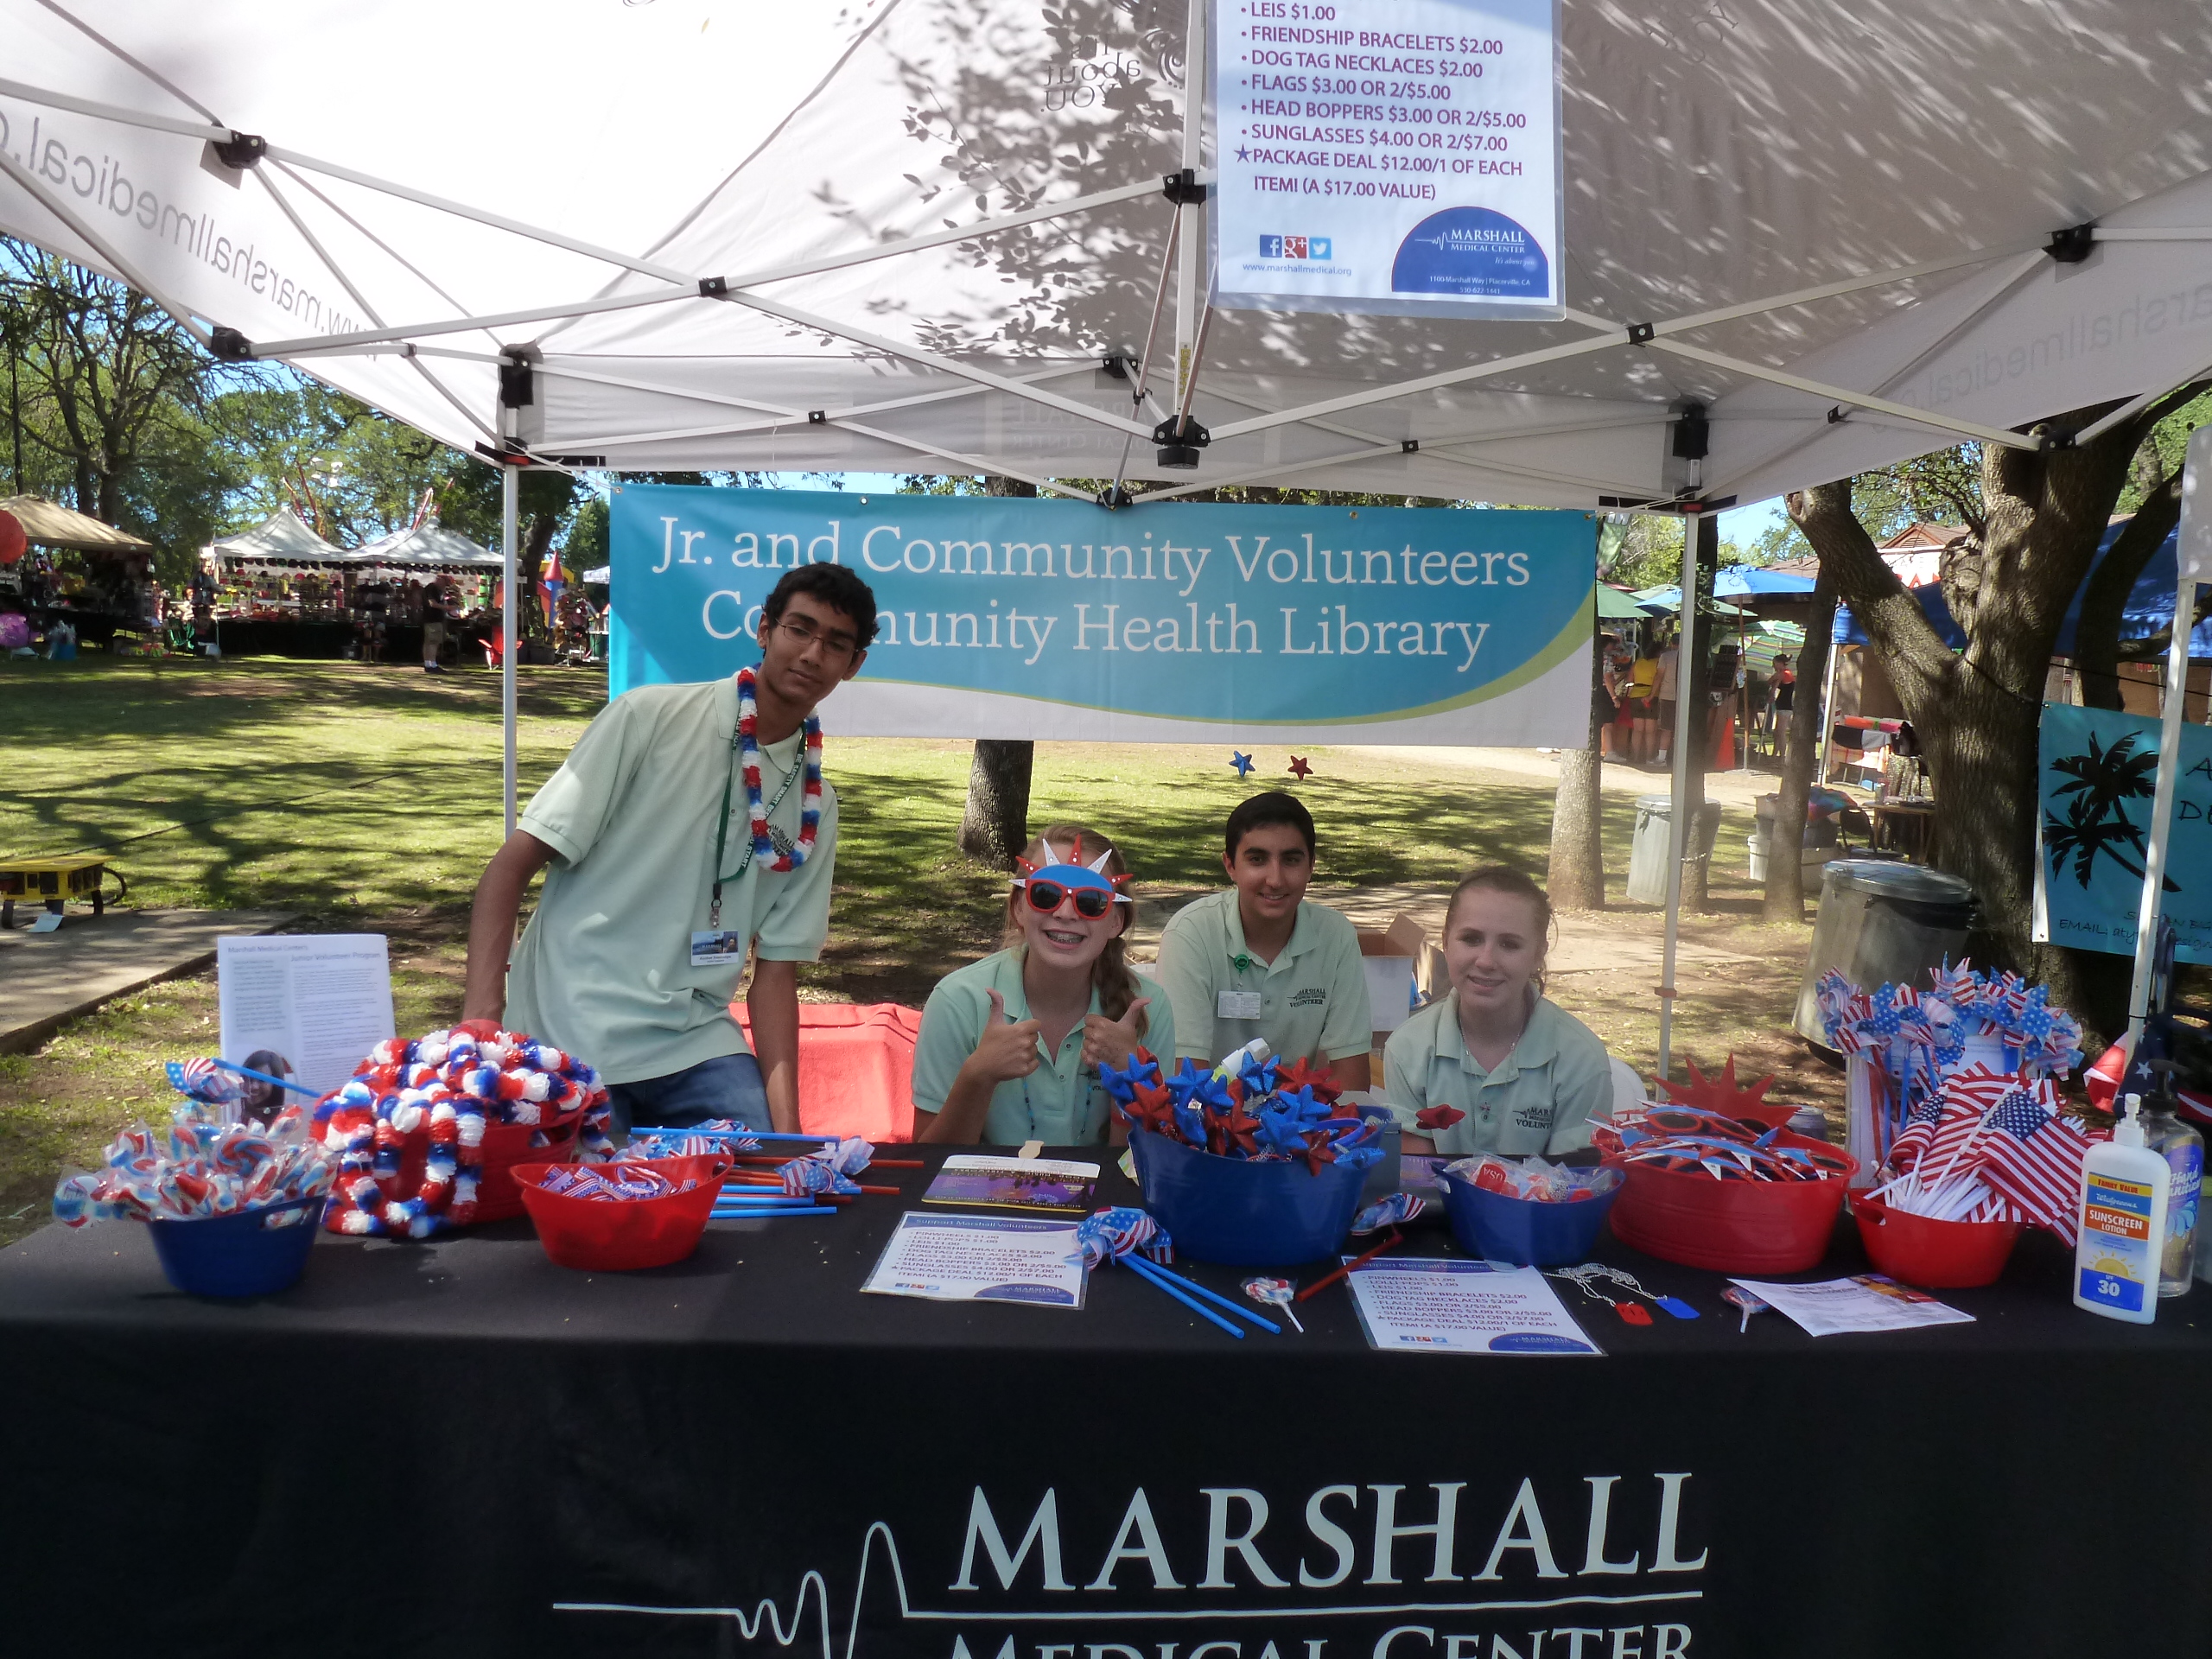 Marshalls Junior Volunteers help with community outreach